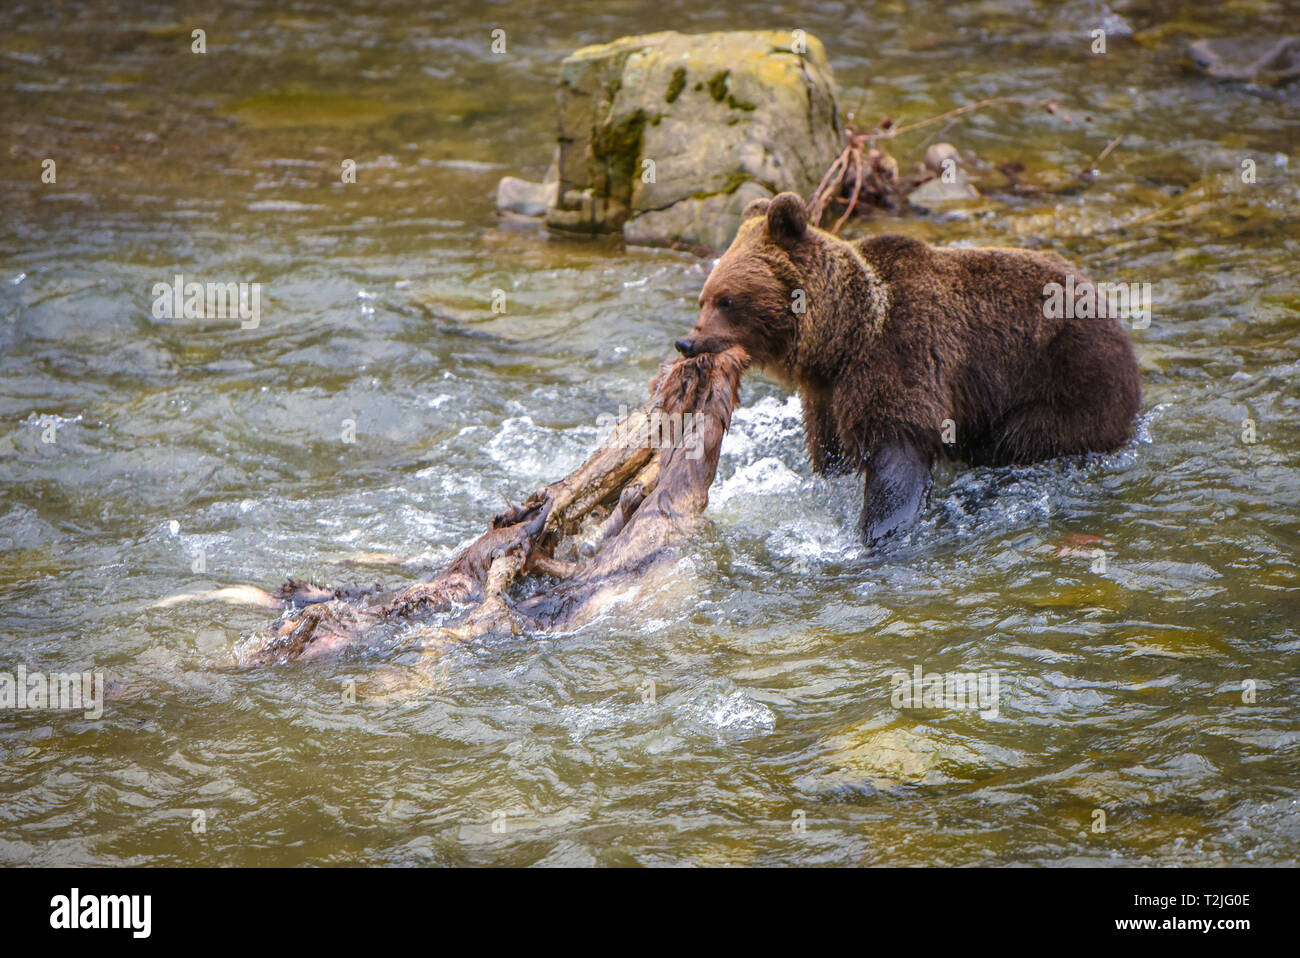 Close up picture of Brown bear with red deer carcass in his mouth going across the river, Carpathian Region, Poland, Eastern Europe. European wildlife Stock Photo